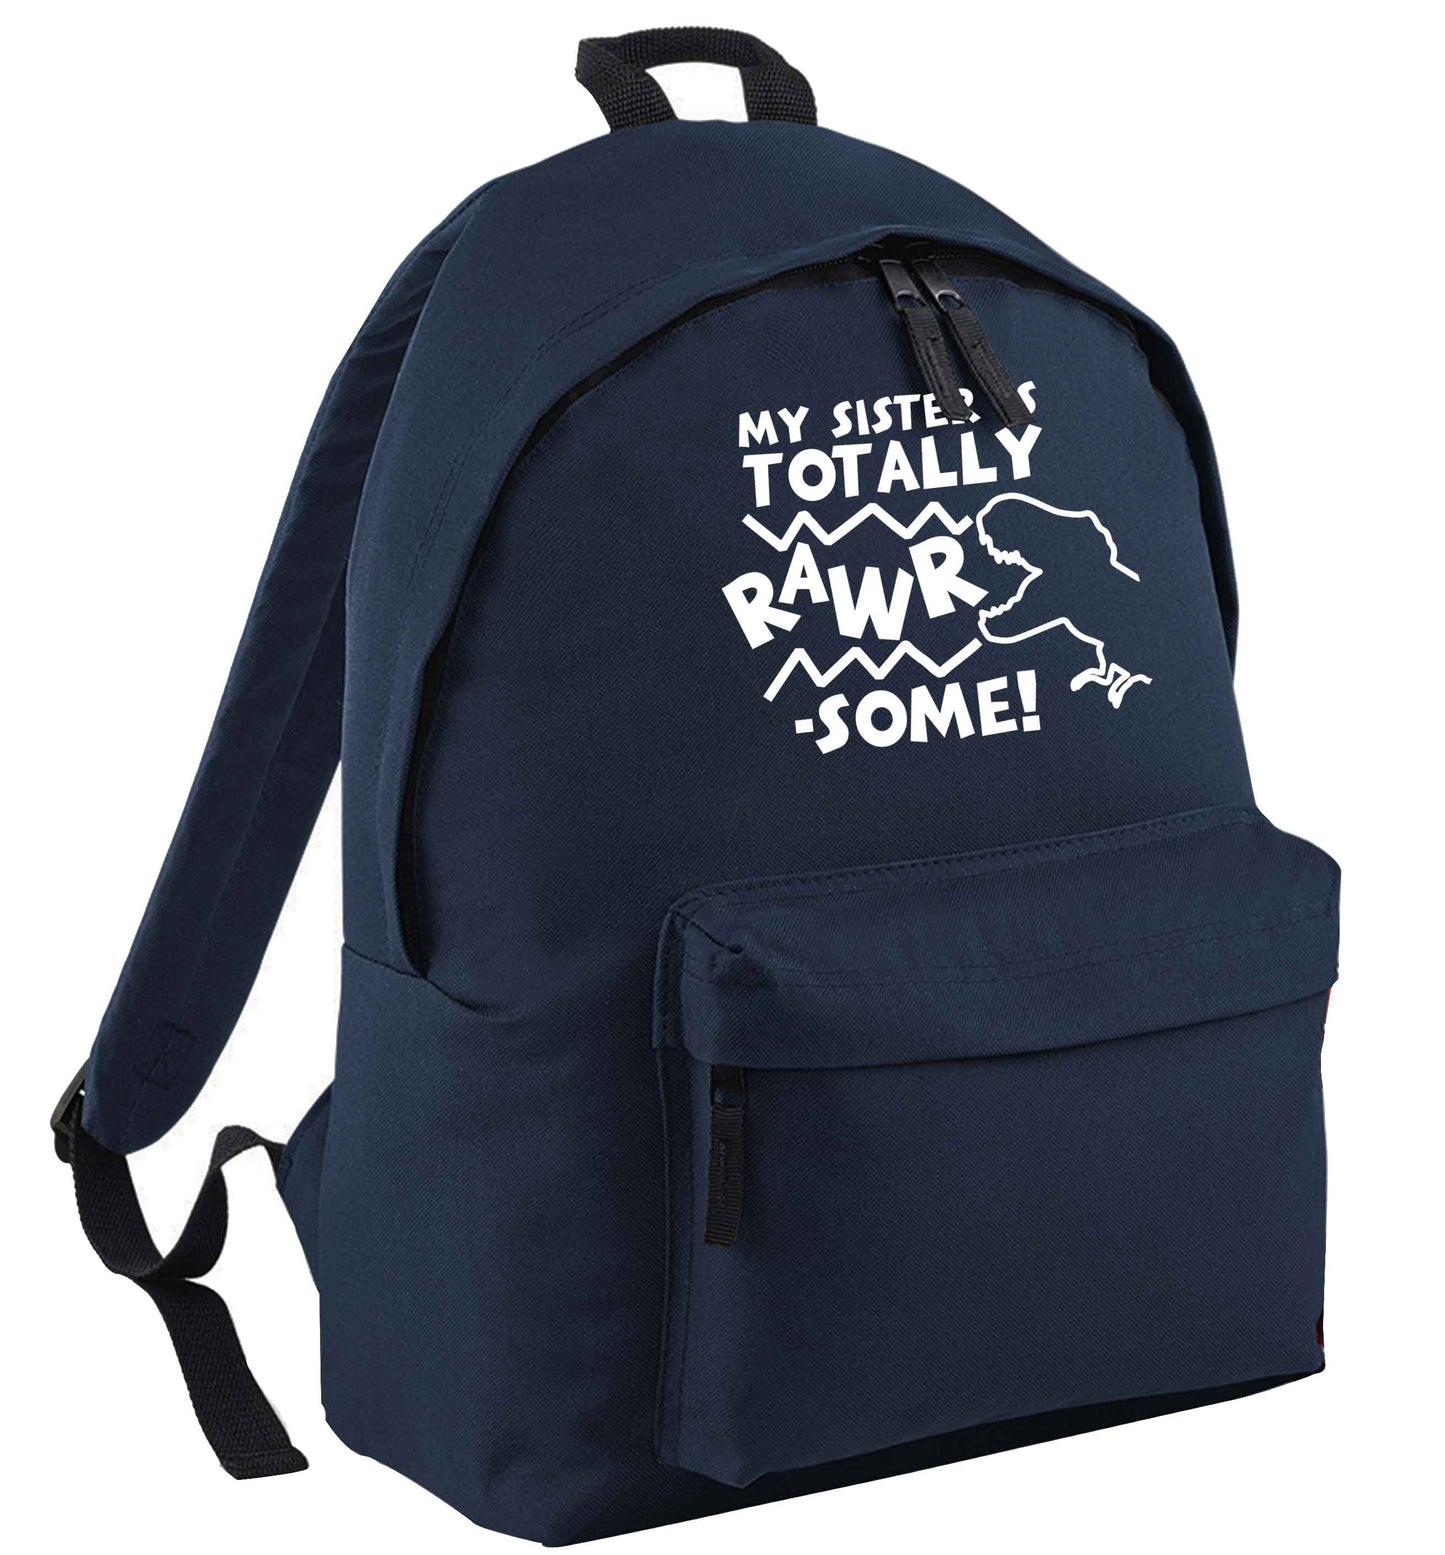 My sister is totally rawrsome navy childrens backpack